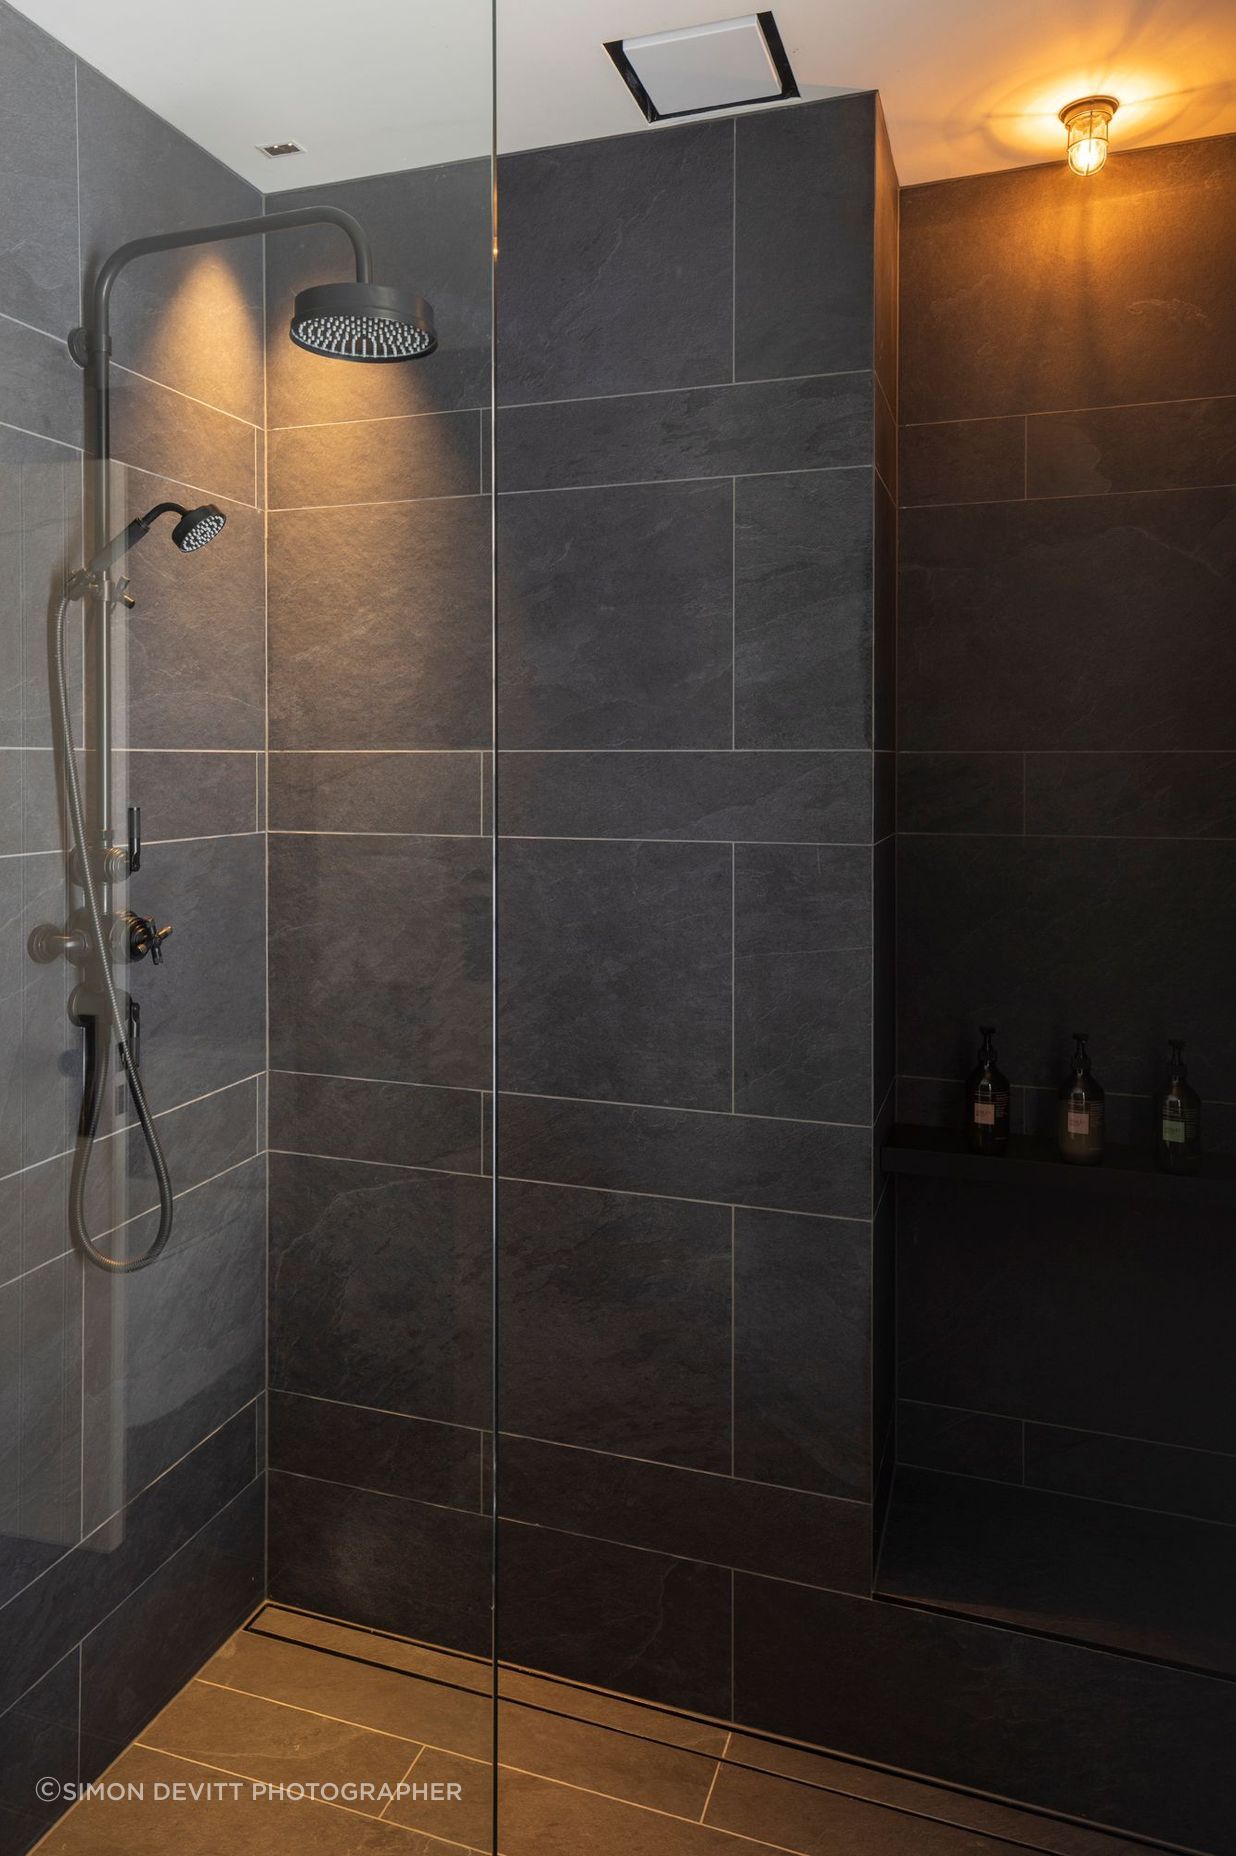 Black textured tile in the bathrooms contrasts with white board and batten that is used in the hallways.